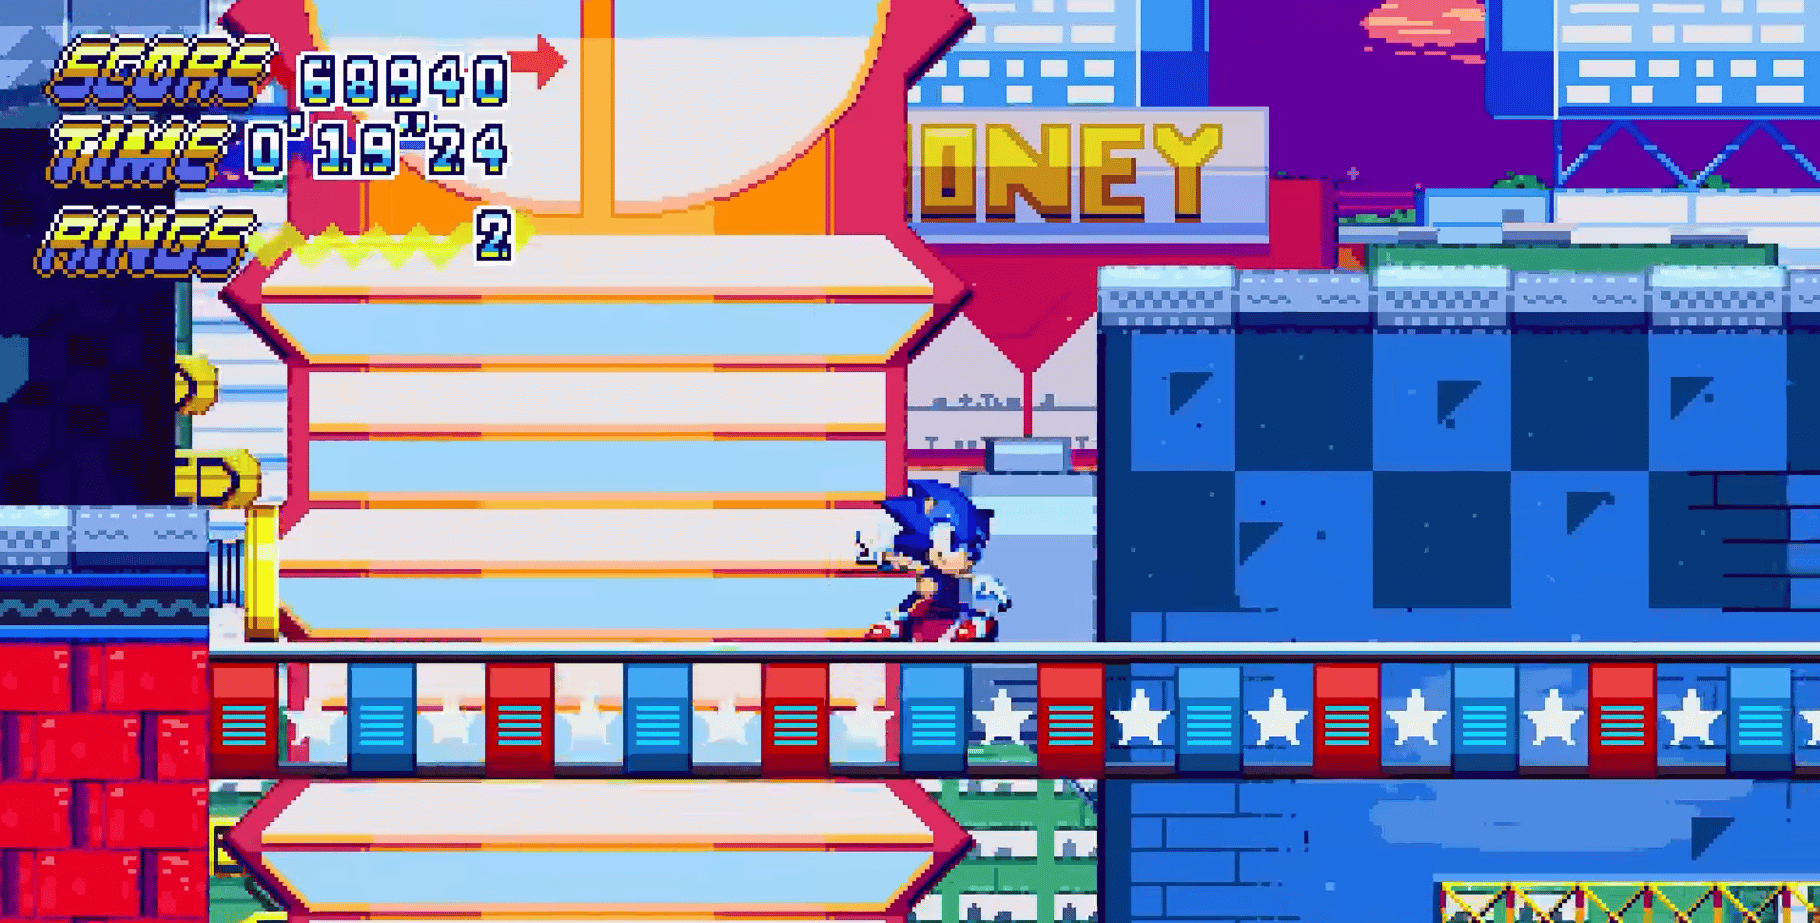 Sonic And The Fallen Star Gamejolt Version by NightingaleGames